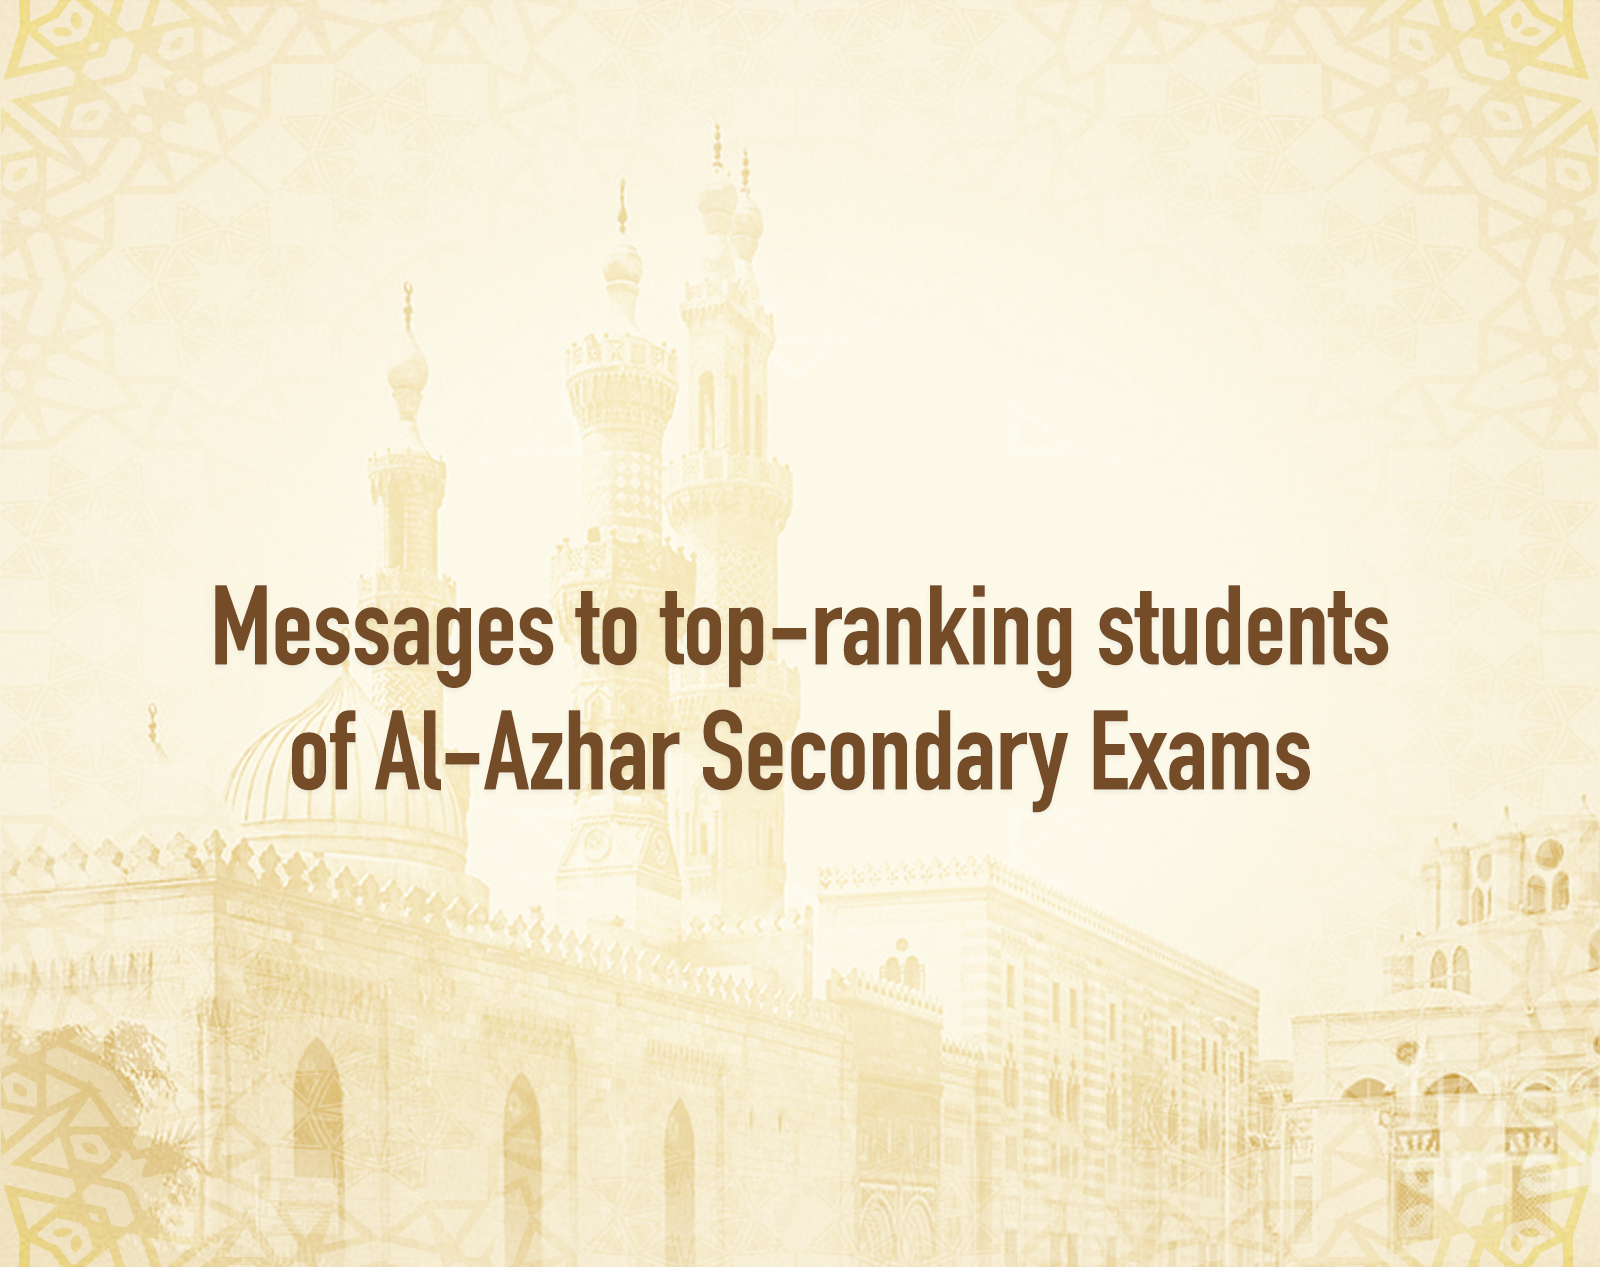 Messages to top-ranking students of Al-Azhar Secondary Exams.png